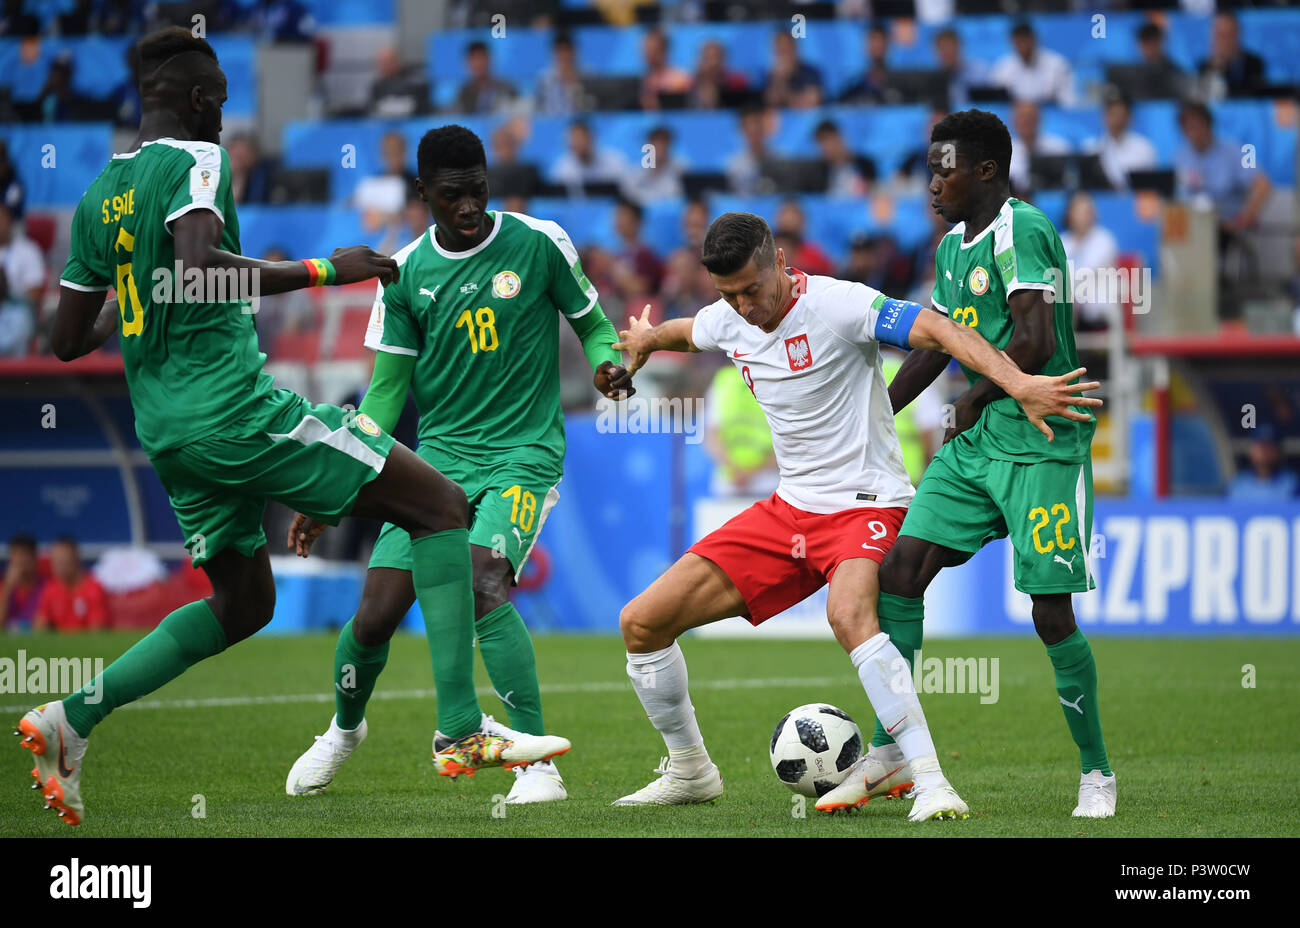 Moscow, Russia. 19th June, 2018. Soccer: World Cup 2018, group stages, group H: Poland vs Senegal at Spartak Stadium. Poland's Robert Lewandowski (2-R) and Senegal's Salif Sane (L-R), Ismaila Sarr and Moussa Wague vie for the ball. Credit: Federico Gambarini/dpa/Alamy Live News Stock Photo